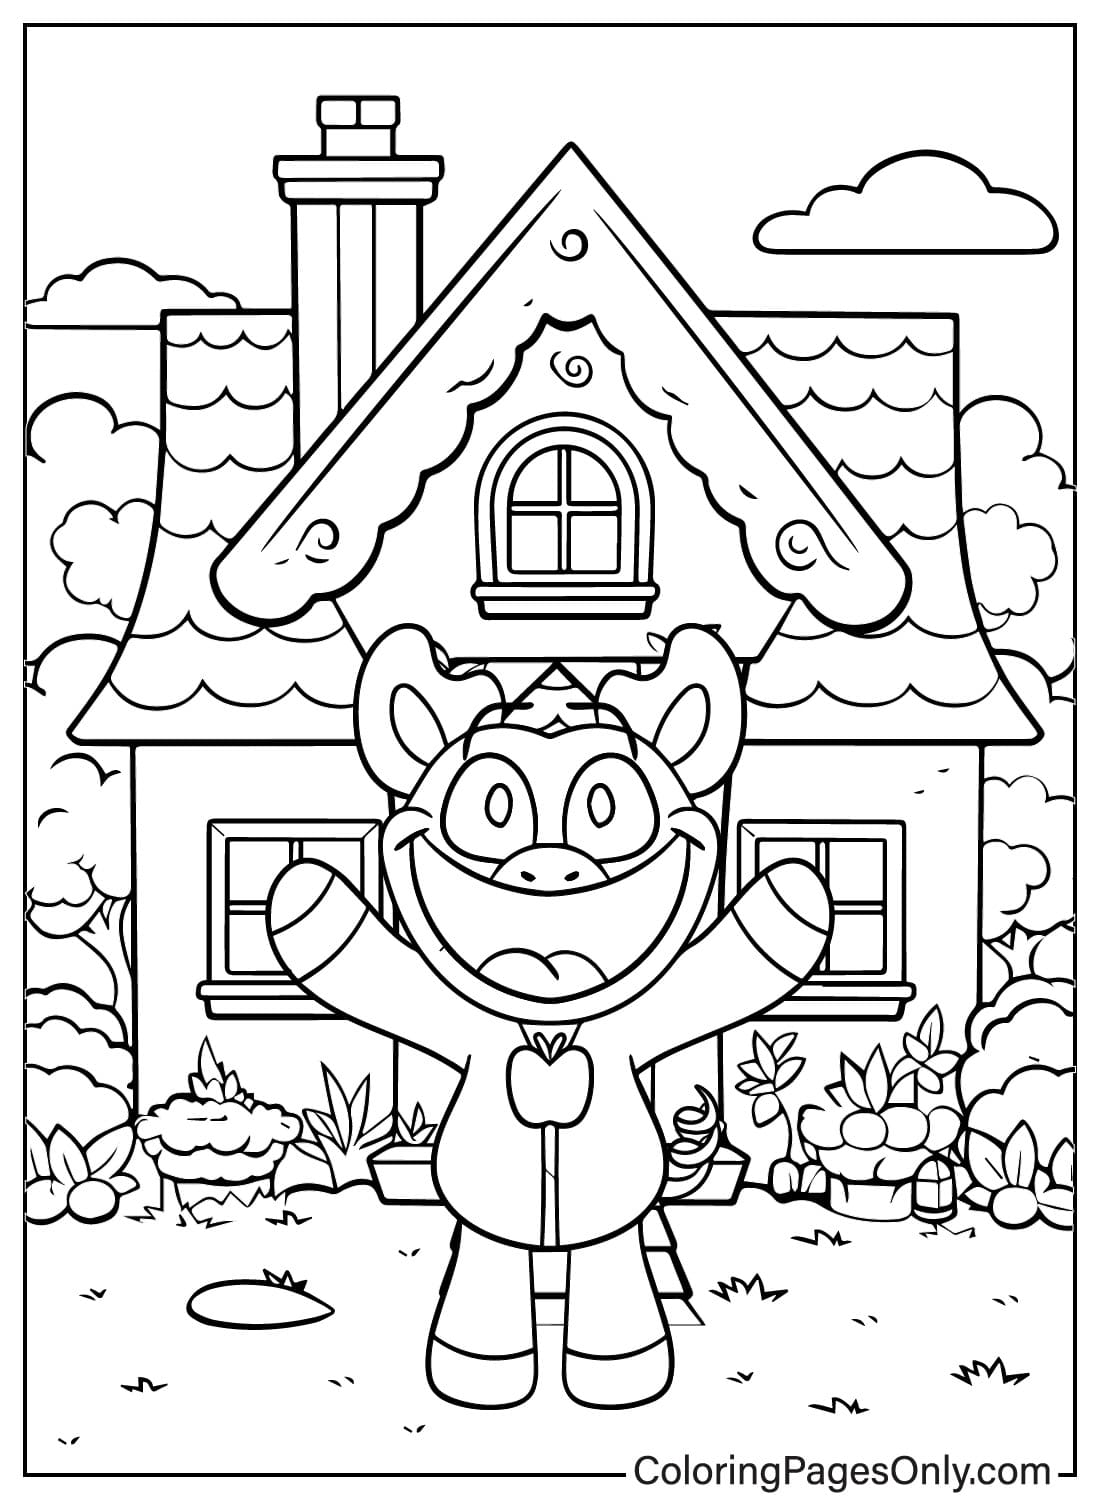 PickyPiggy and House Coloring Page from PickyPiggy